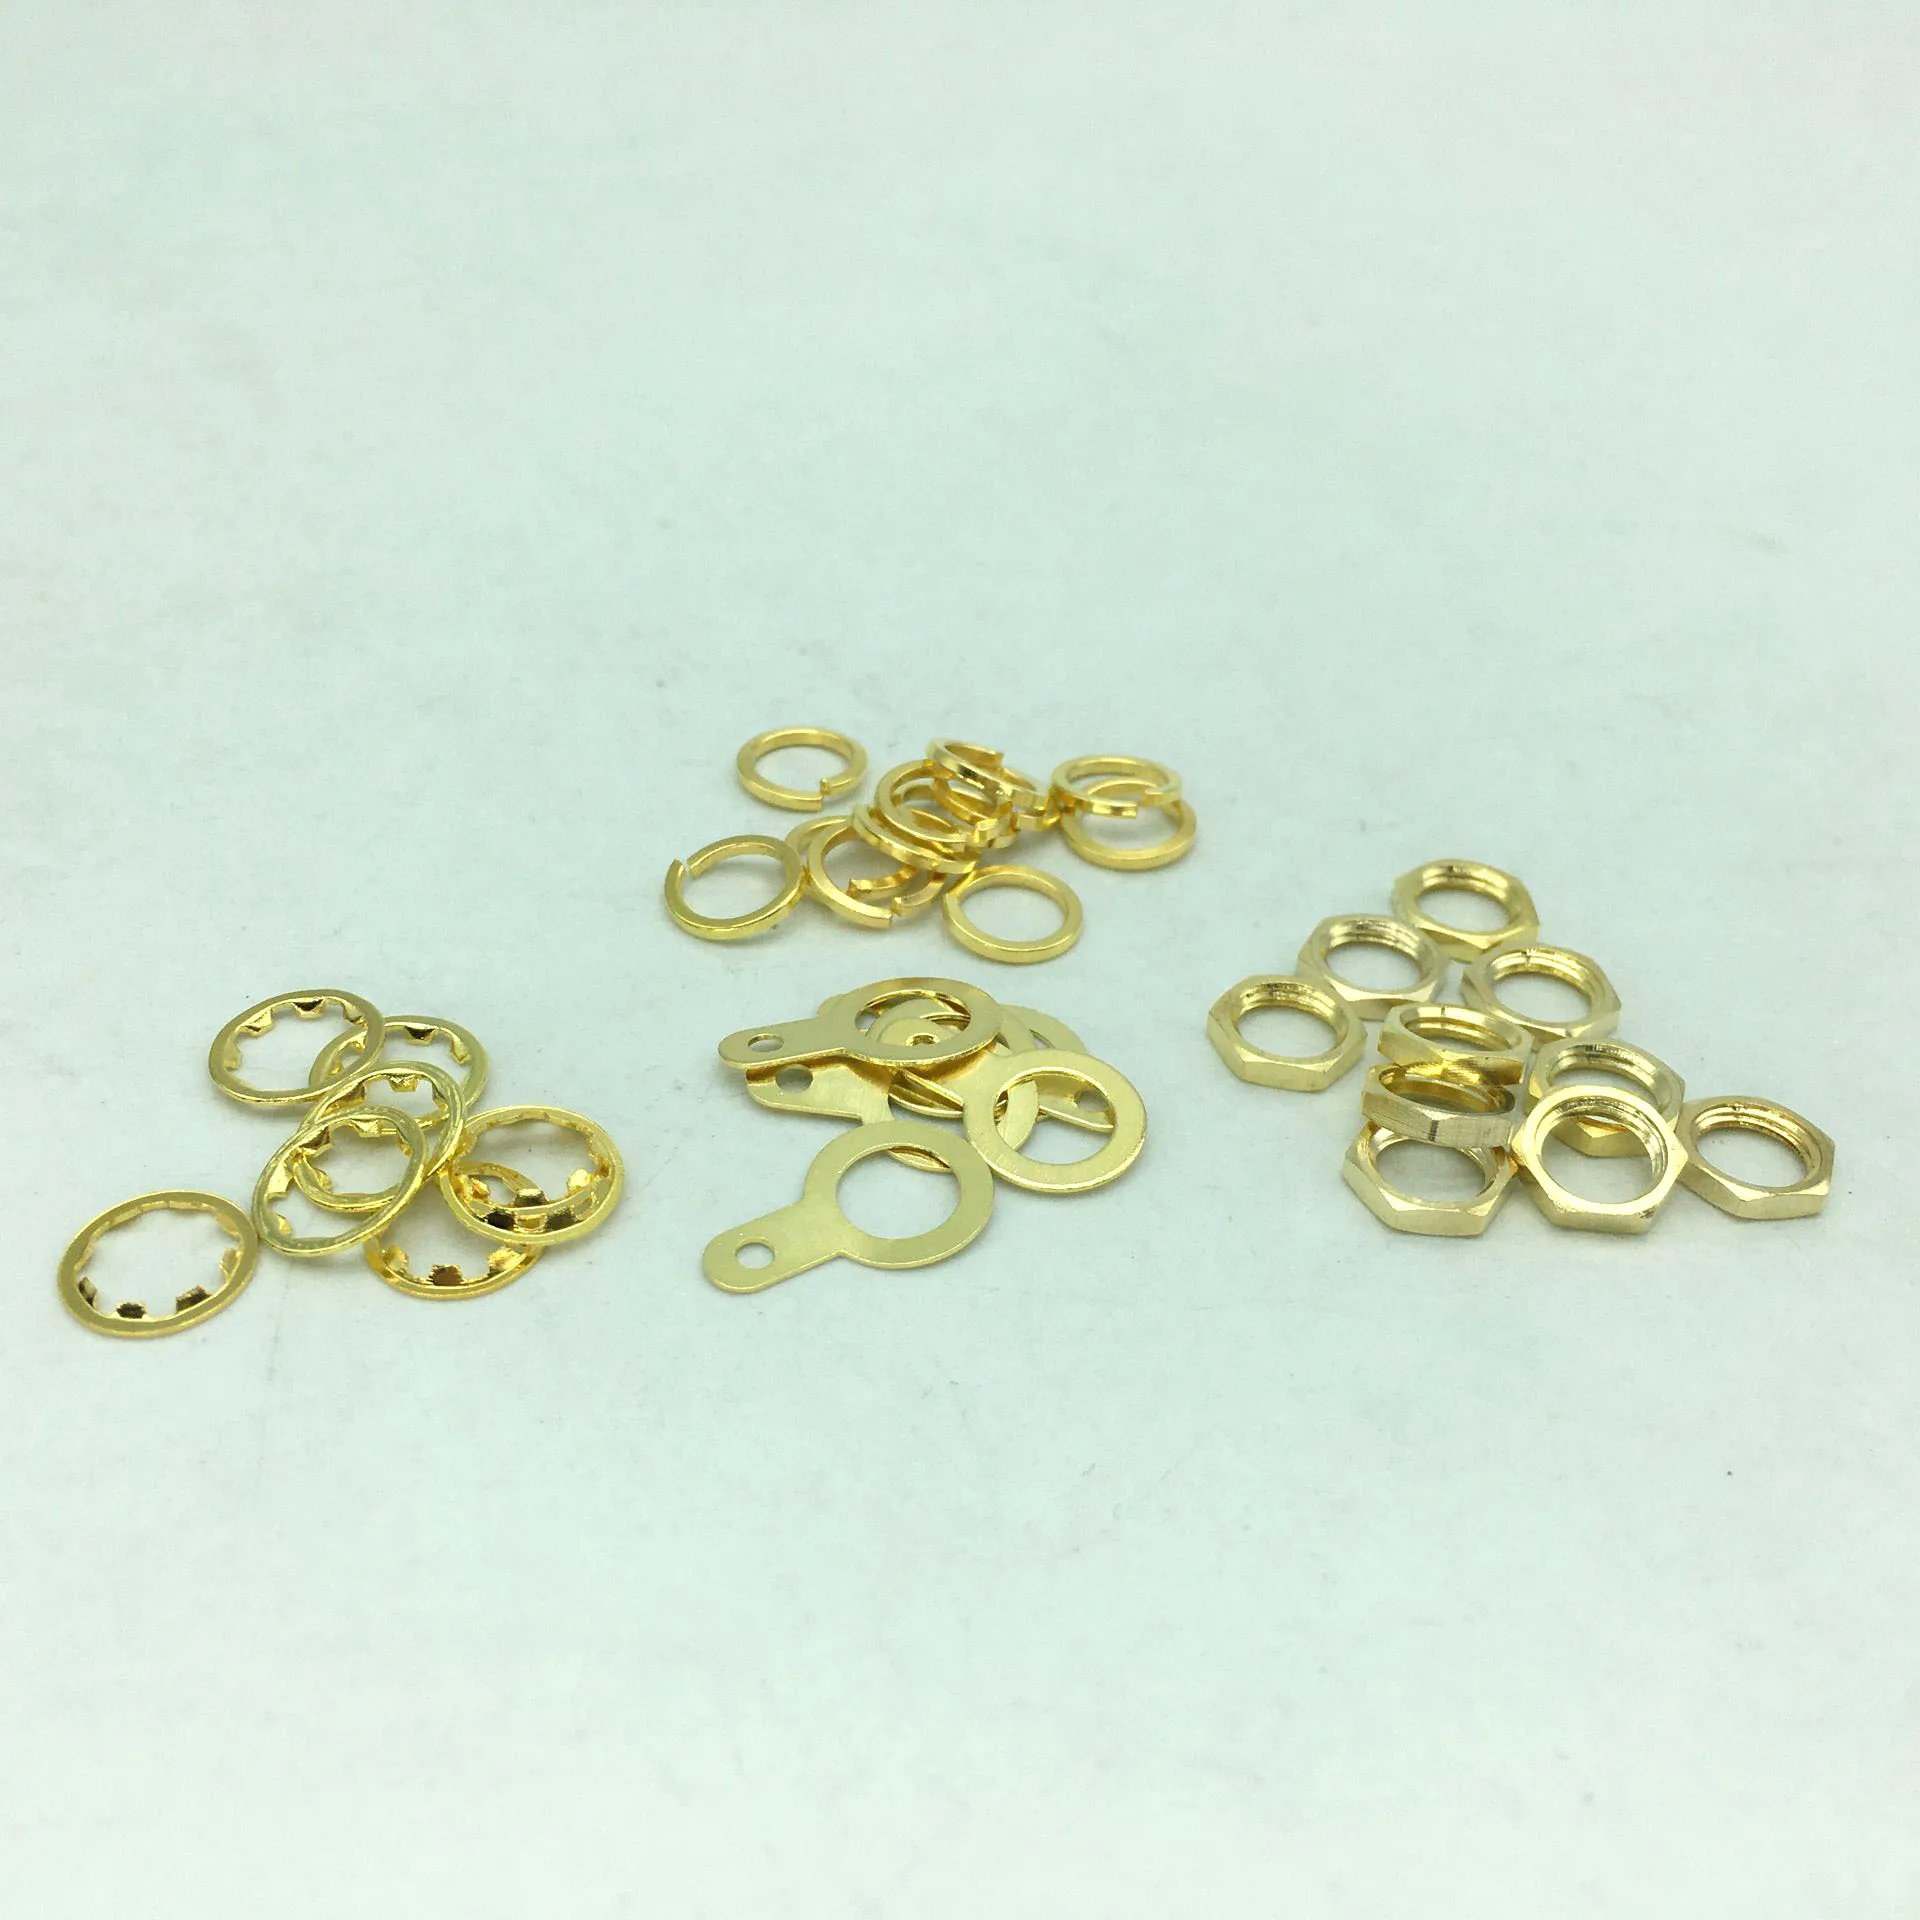 1000 sets 6.35mm 1/4 - 36UNS-2B SMA Screw Nuts/Spacer Washers/Spring Pads/solder tab/lug for Φ6mm RP-SMA / SMA Female Standard